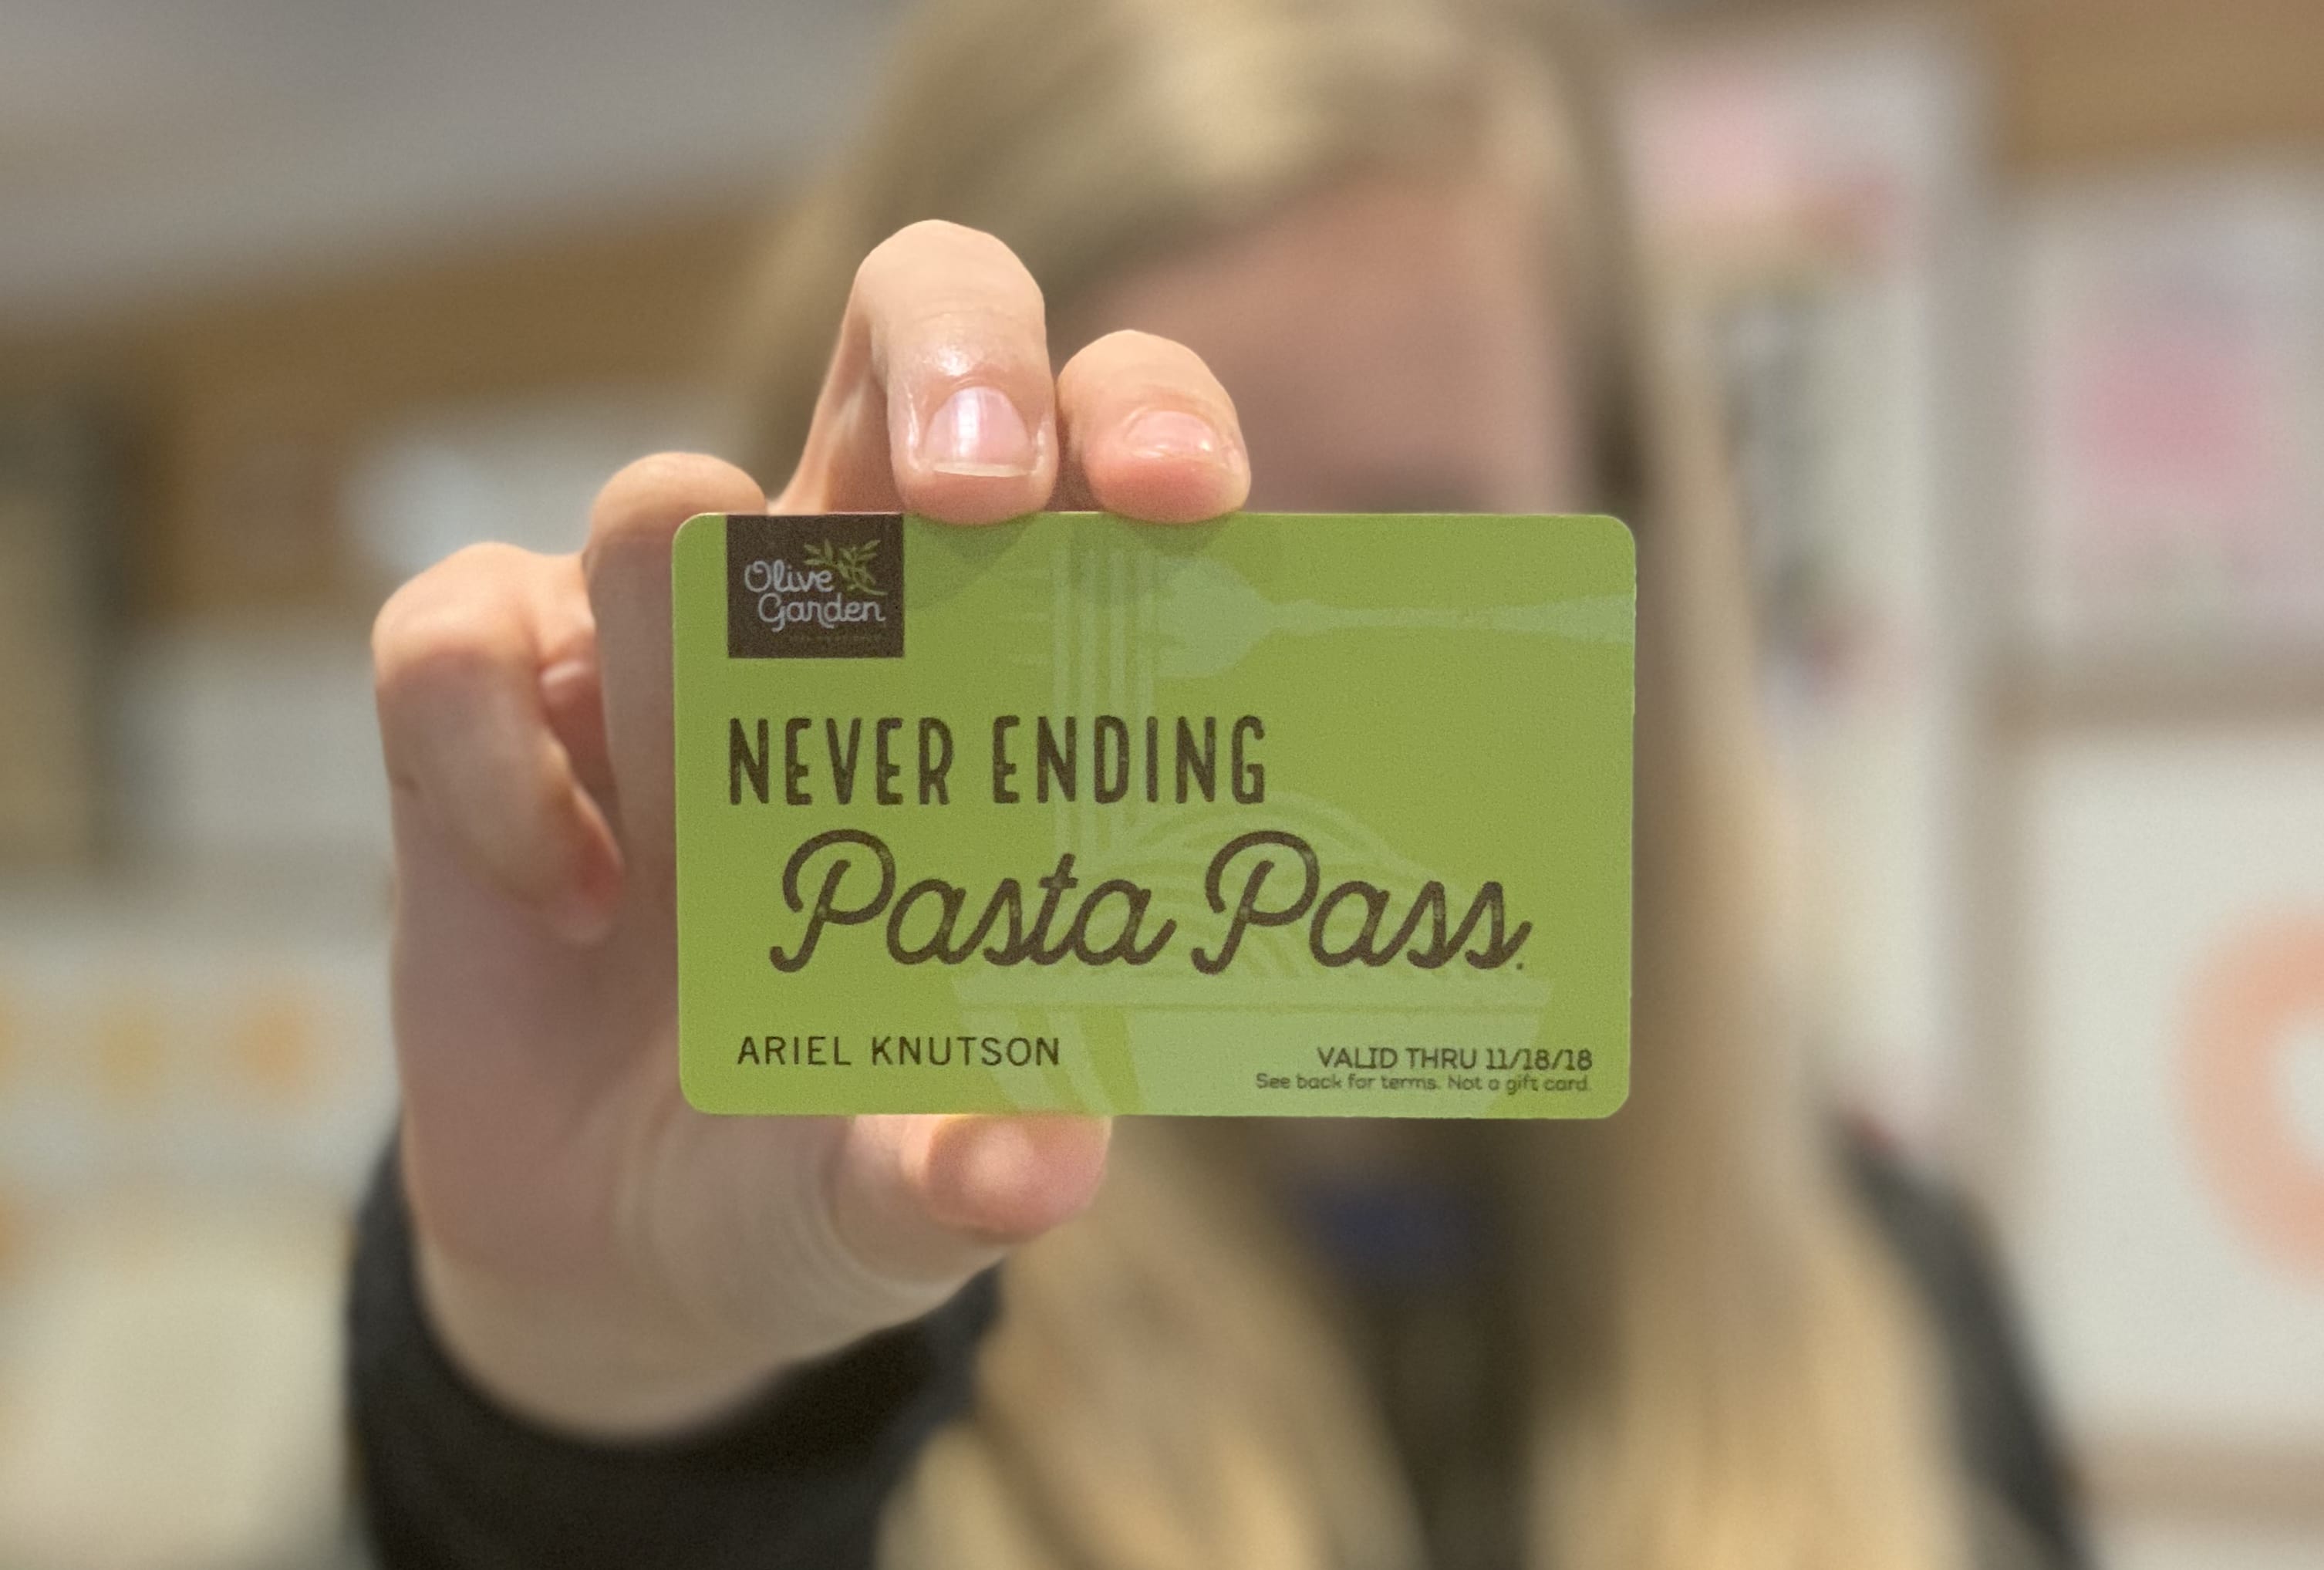 The Pasta Pass Is a Bright Spot in This Dark World Kitchn